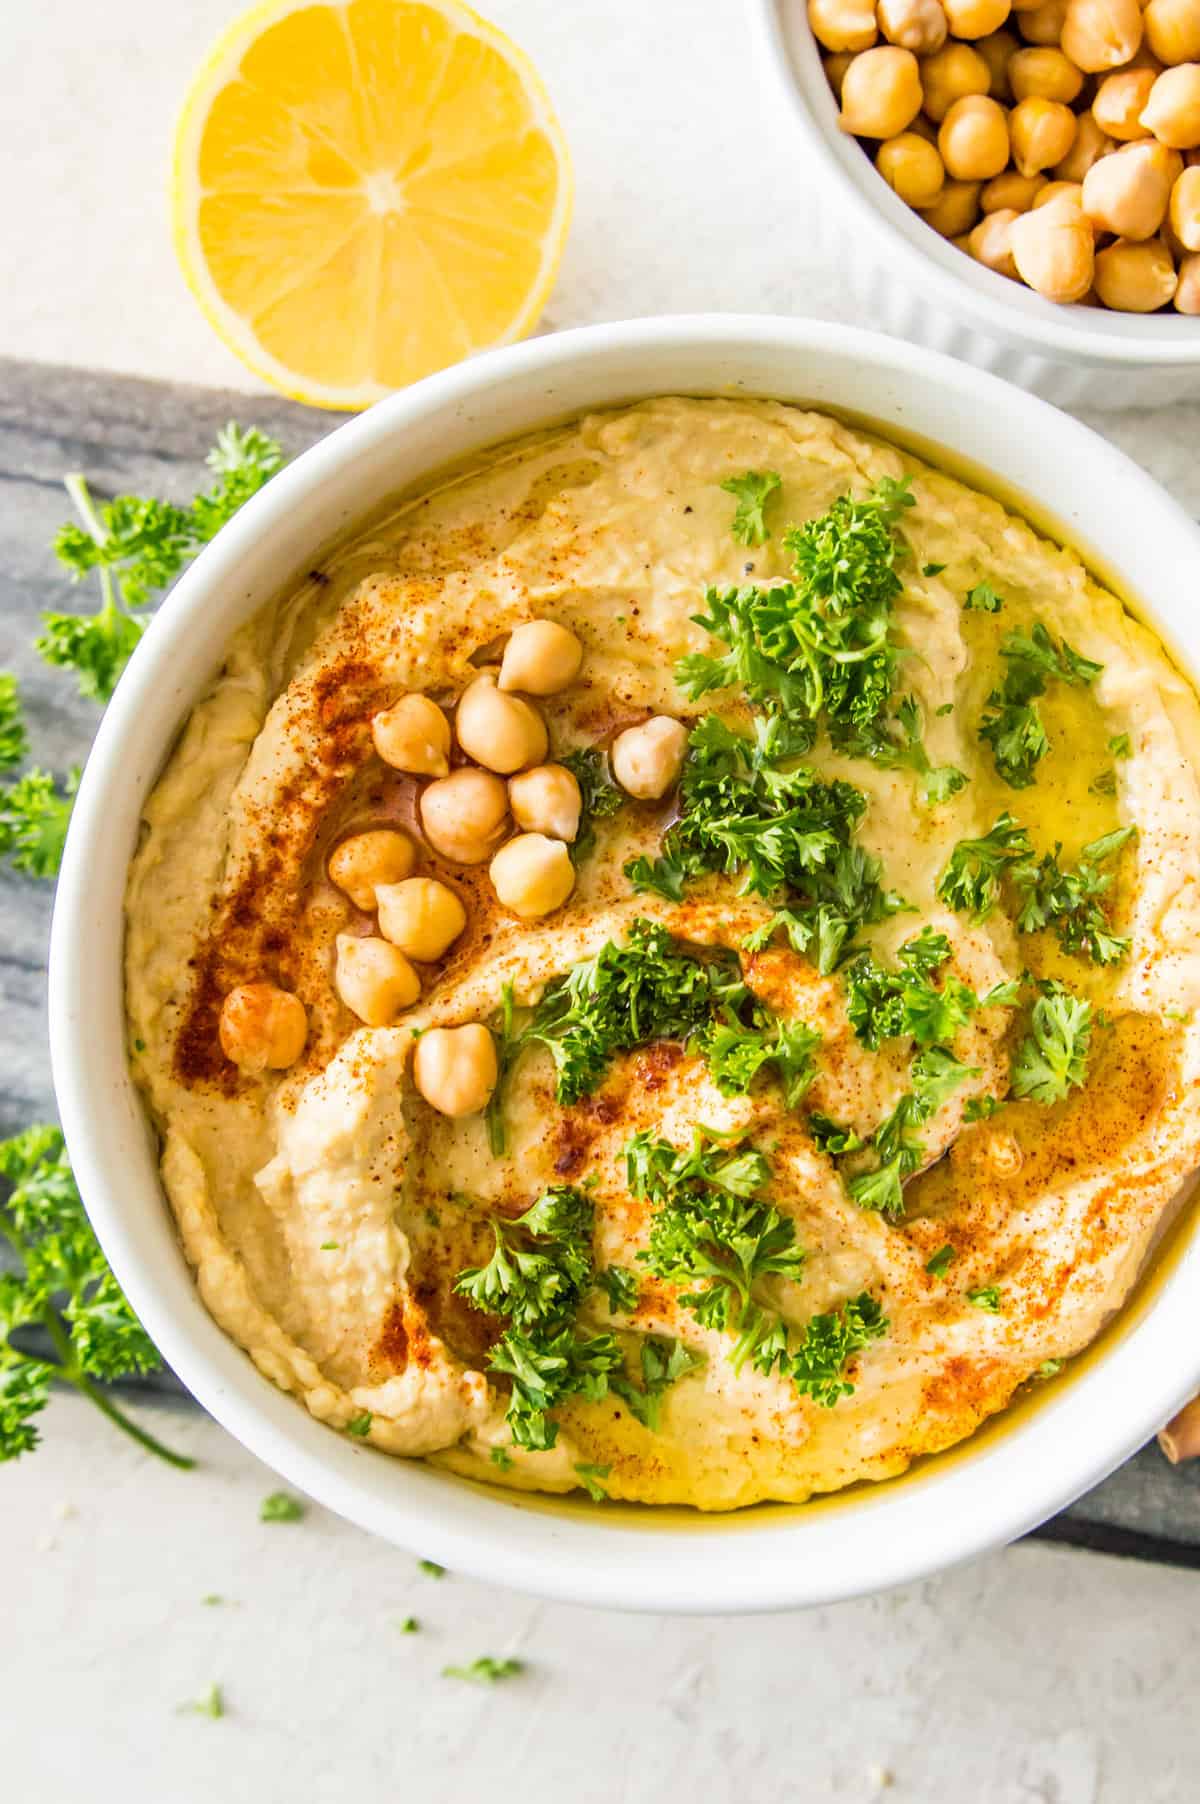 A bowl filled with hummus topped with chopped fresh parsley, paprika and chickpeas surrounded by a lemon wedge and a bowl of chickpeas.